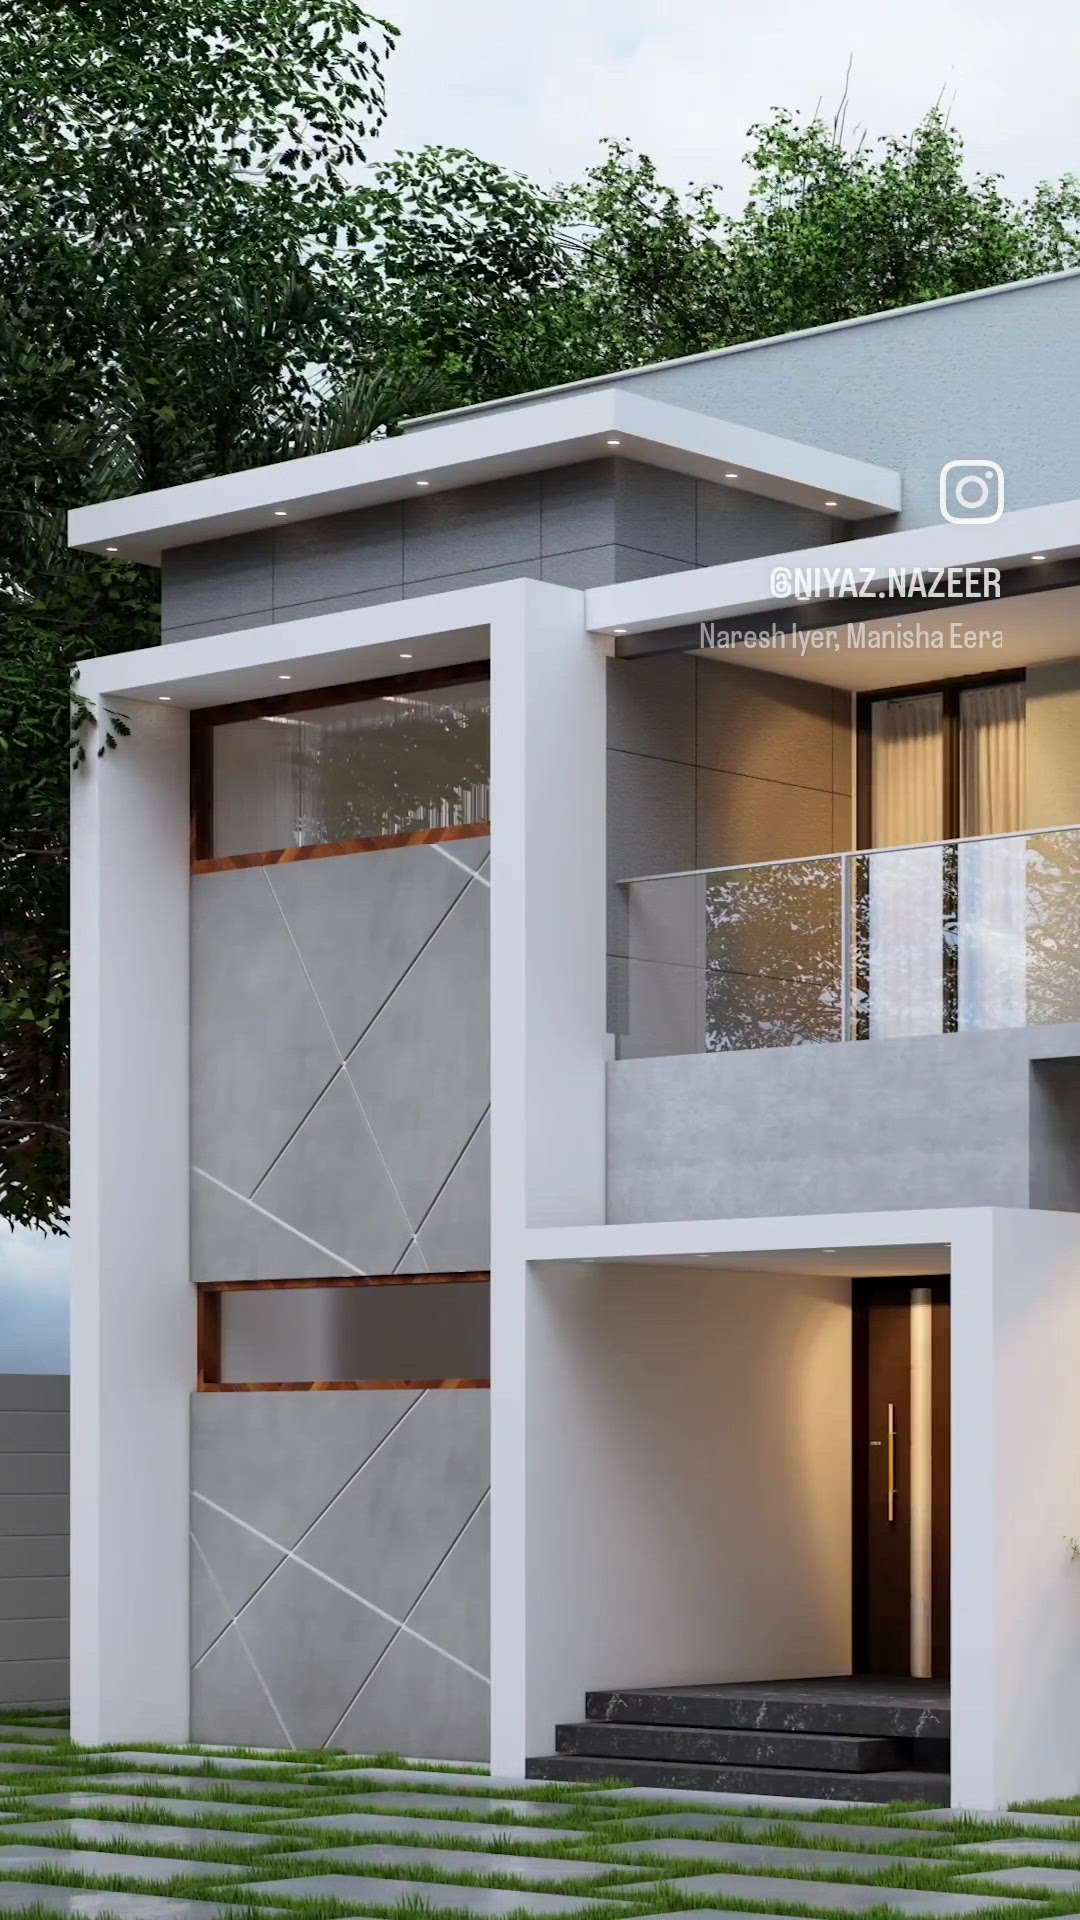 New ✨️

Dm to prepare 3d elevation of your dream home at low cost
Wh: 8-0-7-5-4-7-8-1-6-0

#keralahomes
#viralhomes
#keralahouse
#keralahome3delevation
#3dvisualization
#keralaviral
#architecture
#archidesignhome
#architecturevisualization
#3dvisualization
#3dhomedesign